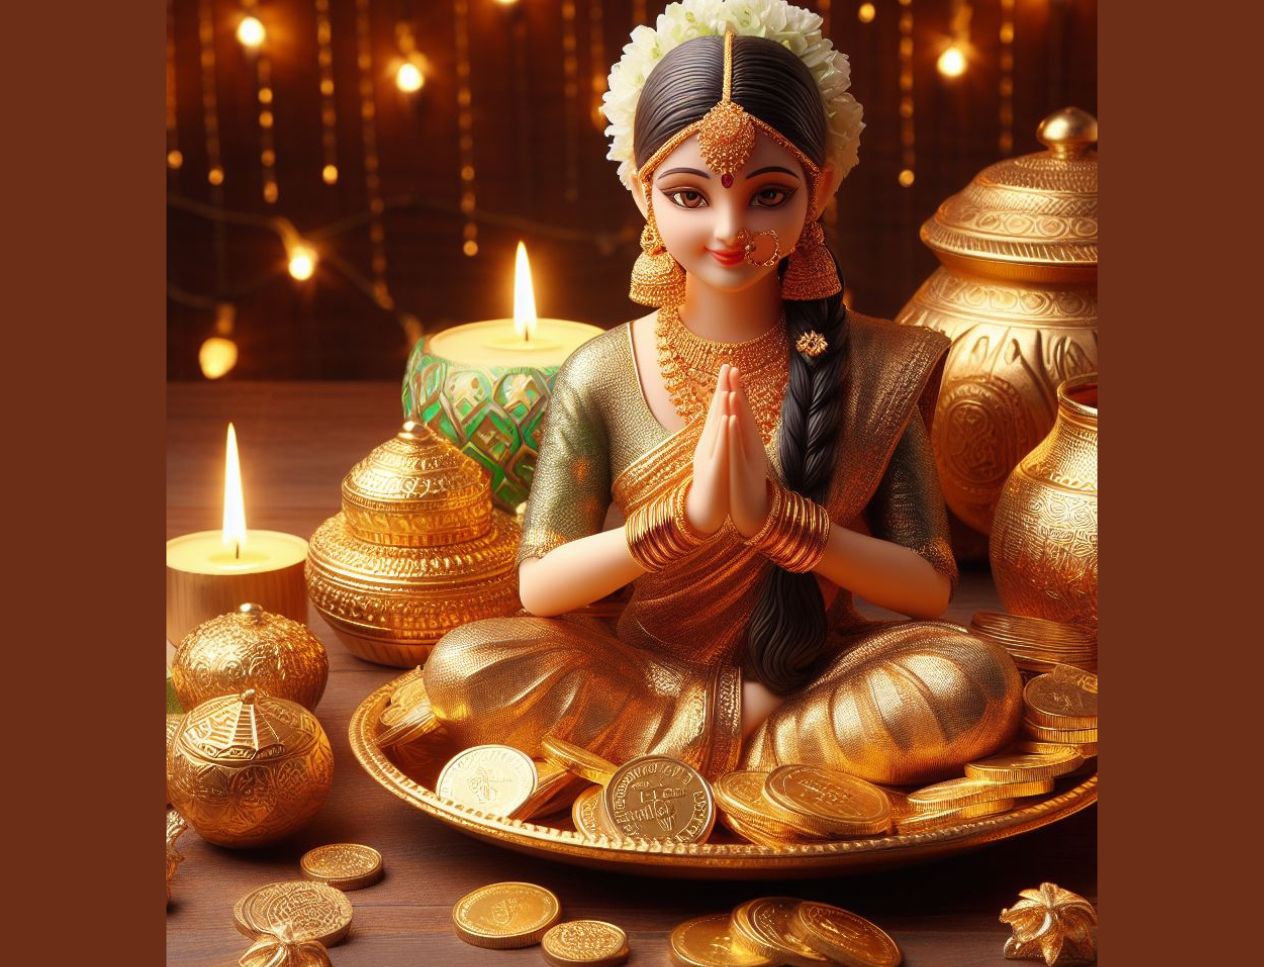 Why Should You Buy Gold On Dhanteras?